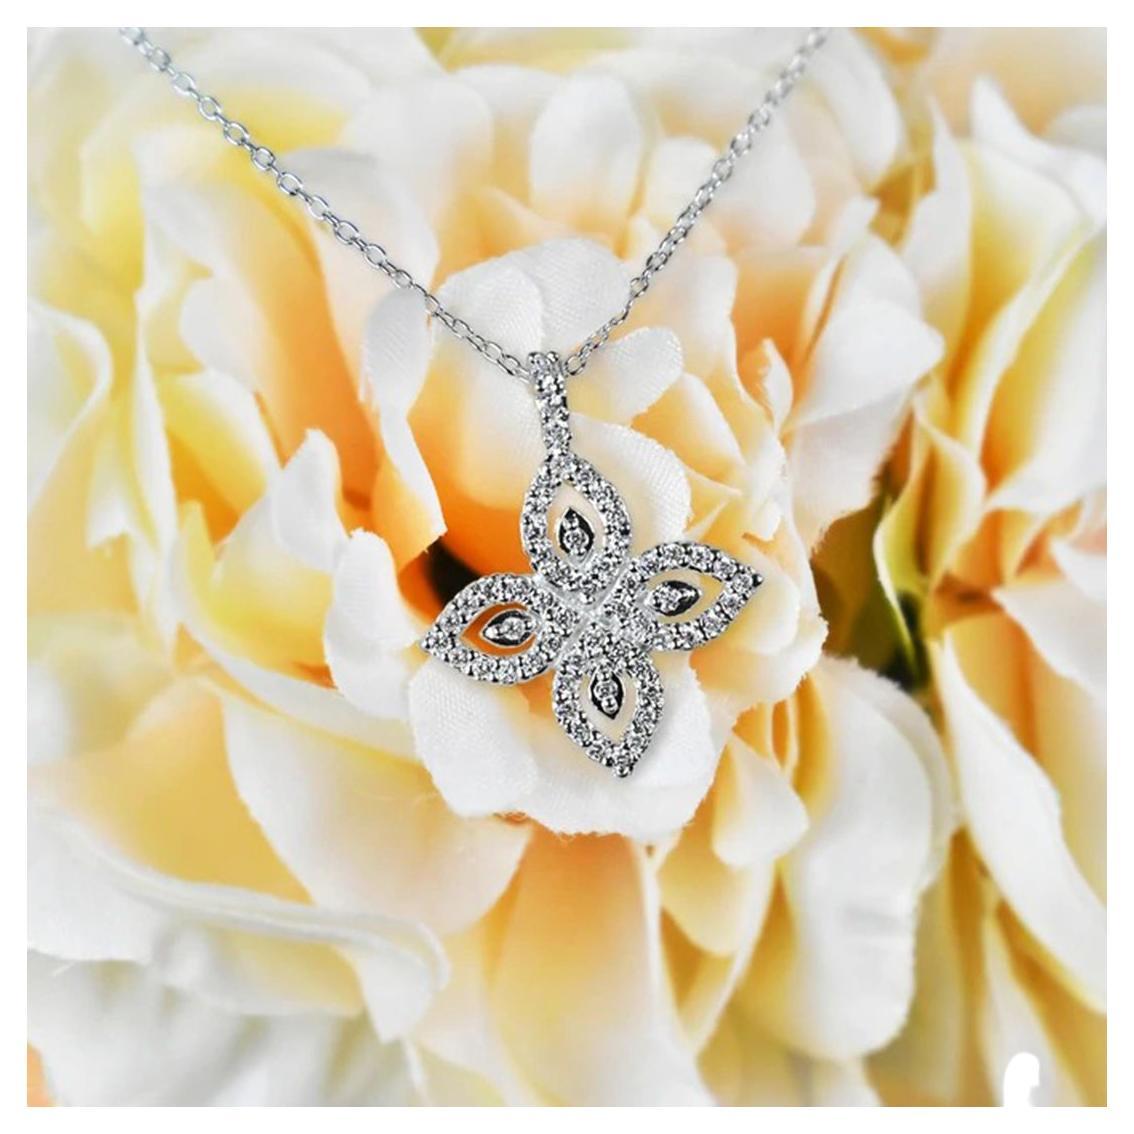 Diamond Clover Necklace is made of 18k solid gold available in three colors, White Gold / Rose Gold / Yellow Gold.

Lightweight and gorgeous natural genuine round cut diamond. Each diamond is hand selected by me to ensure quality and set by a master